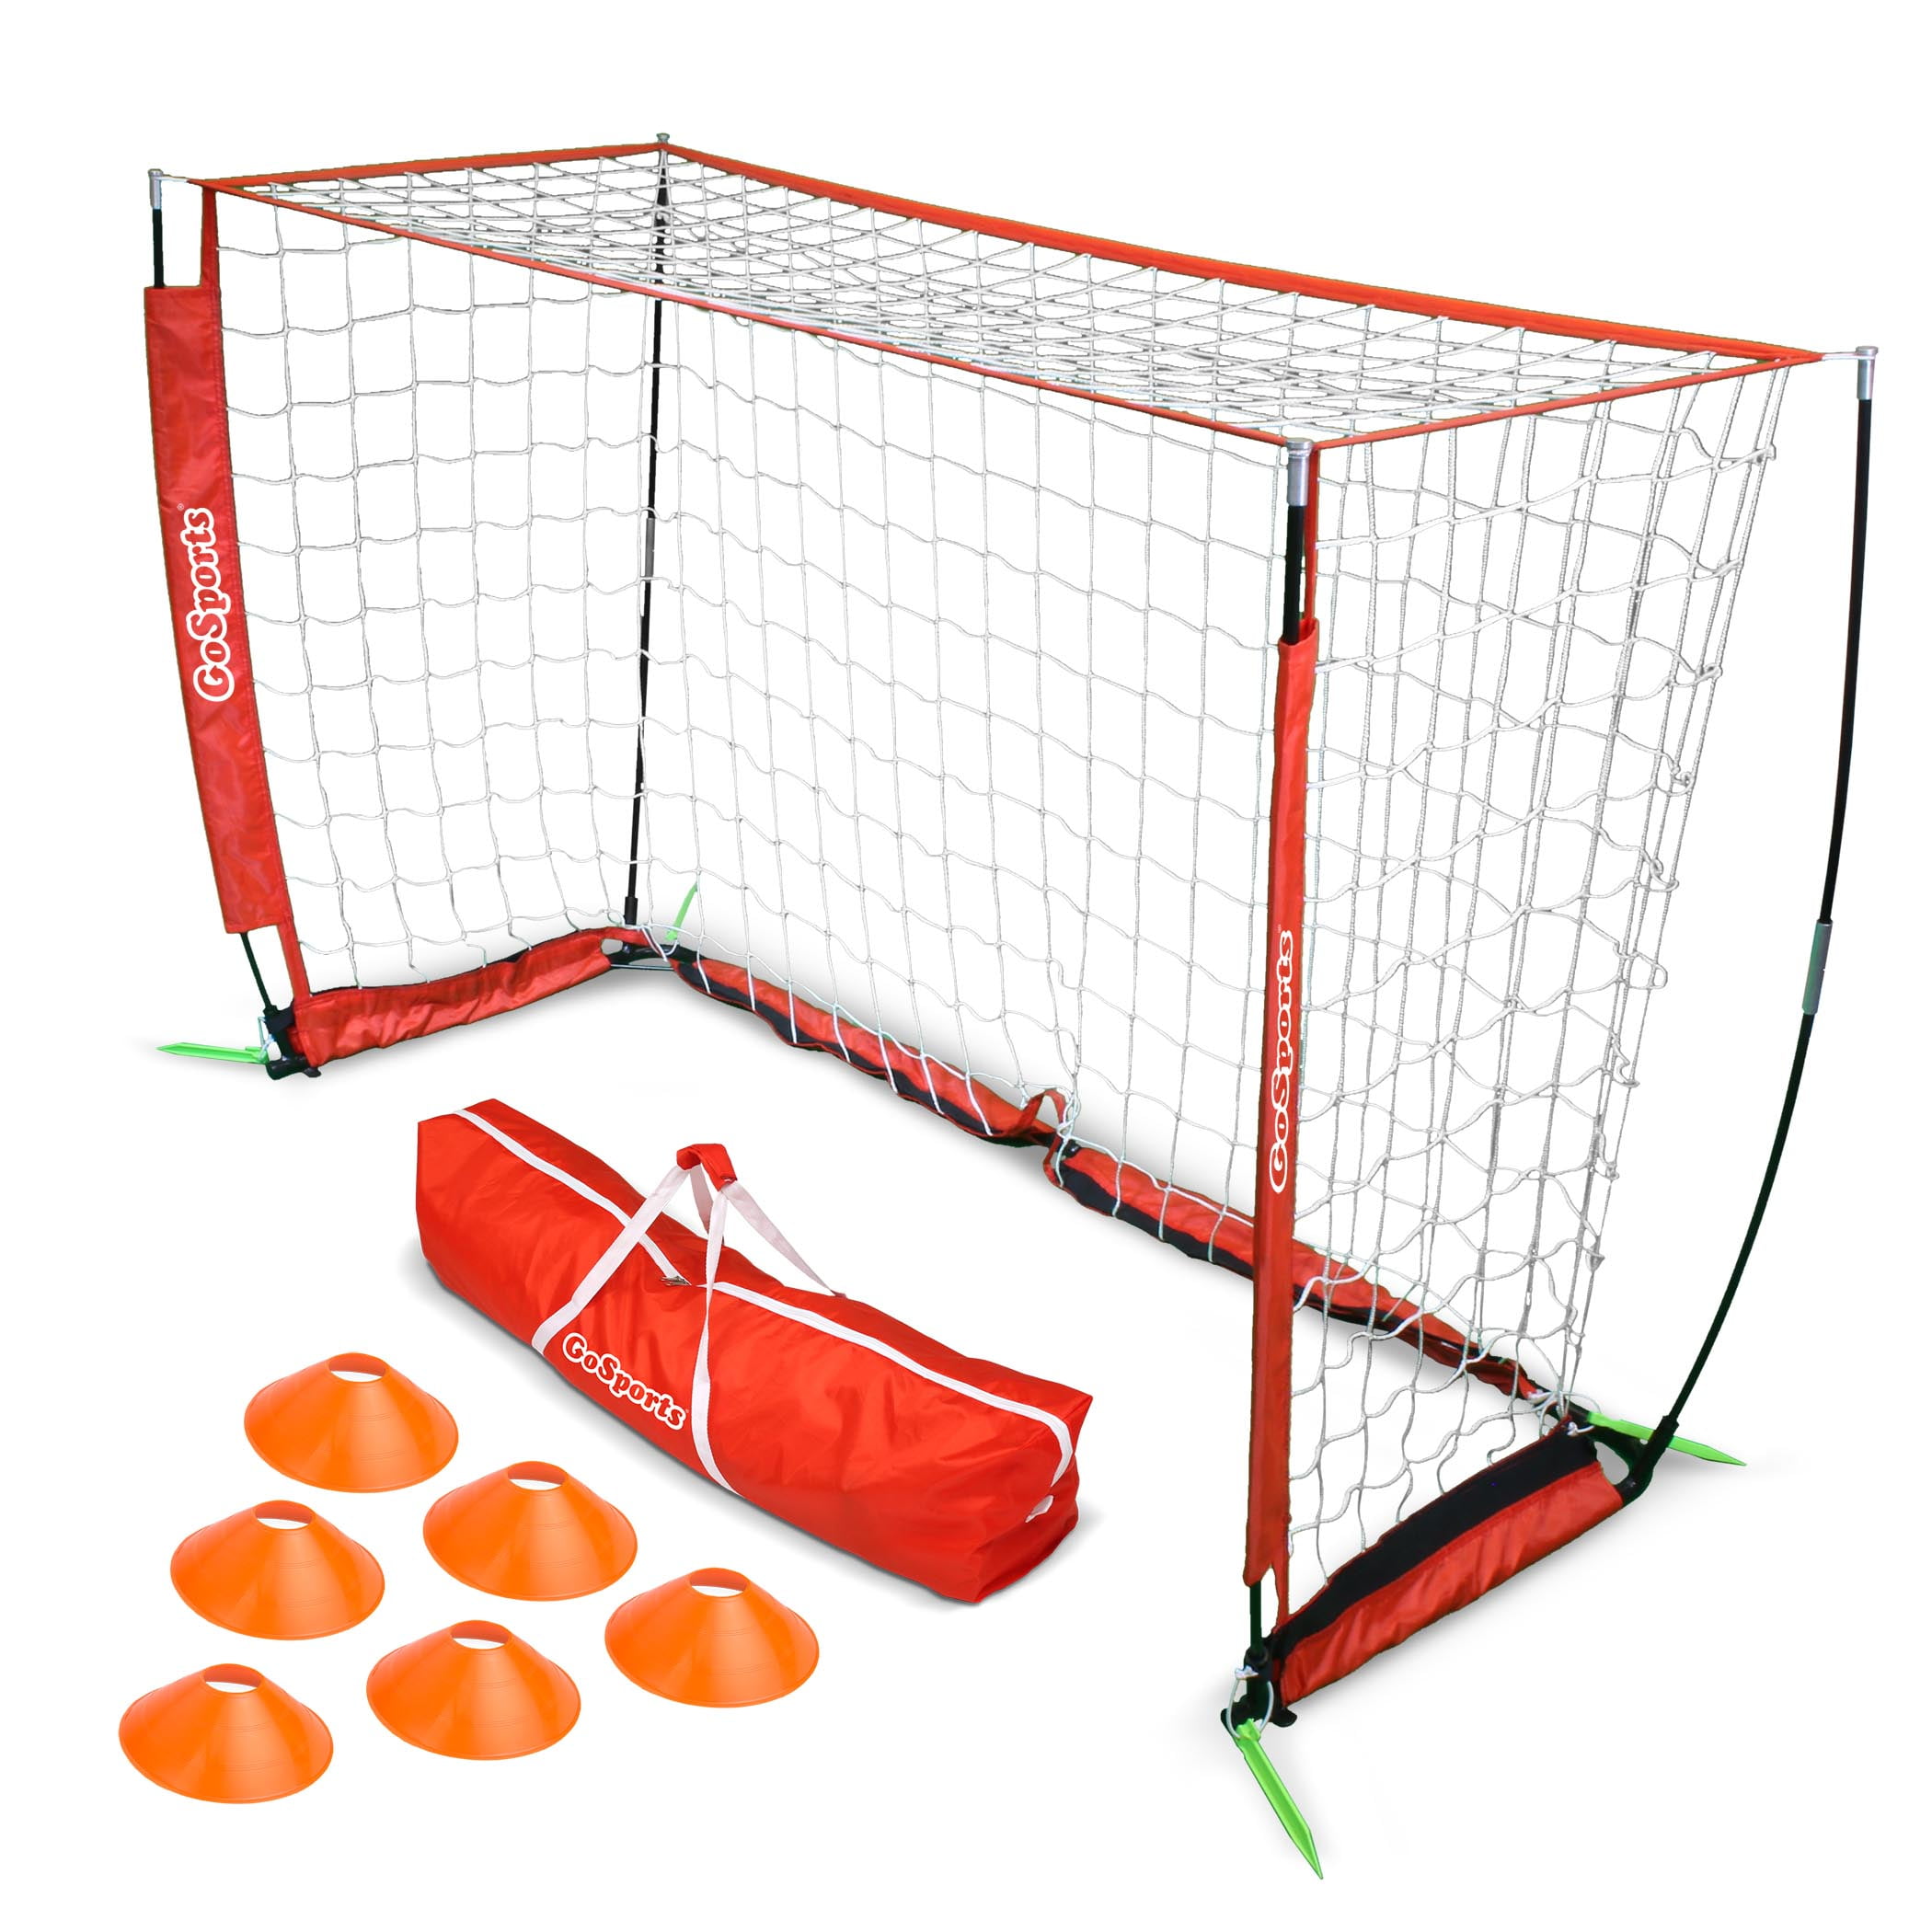 Athletic Works 6' x 4' Pop-Up Soccer Goal Sports Training Portable Outdoor Weath 